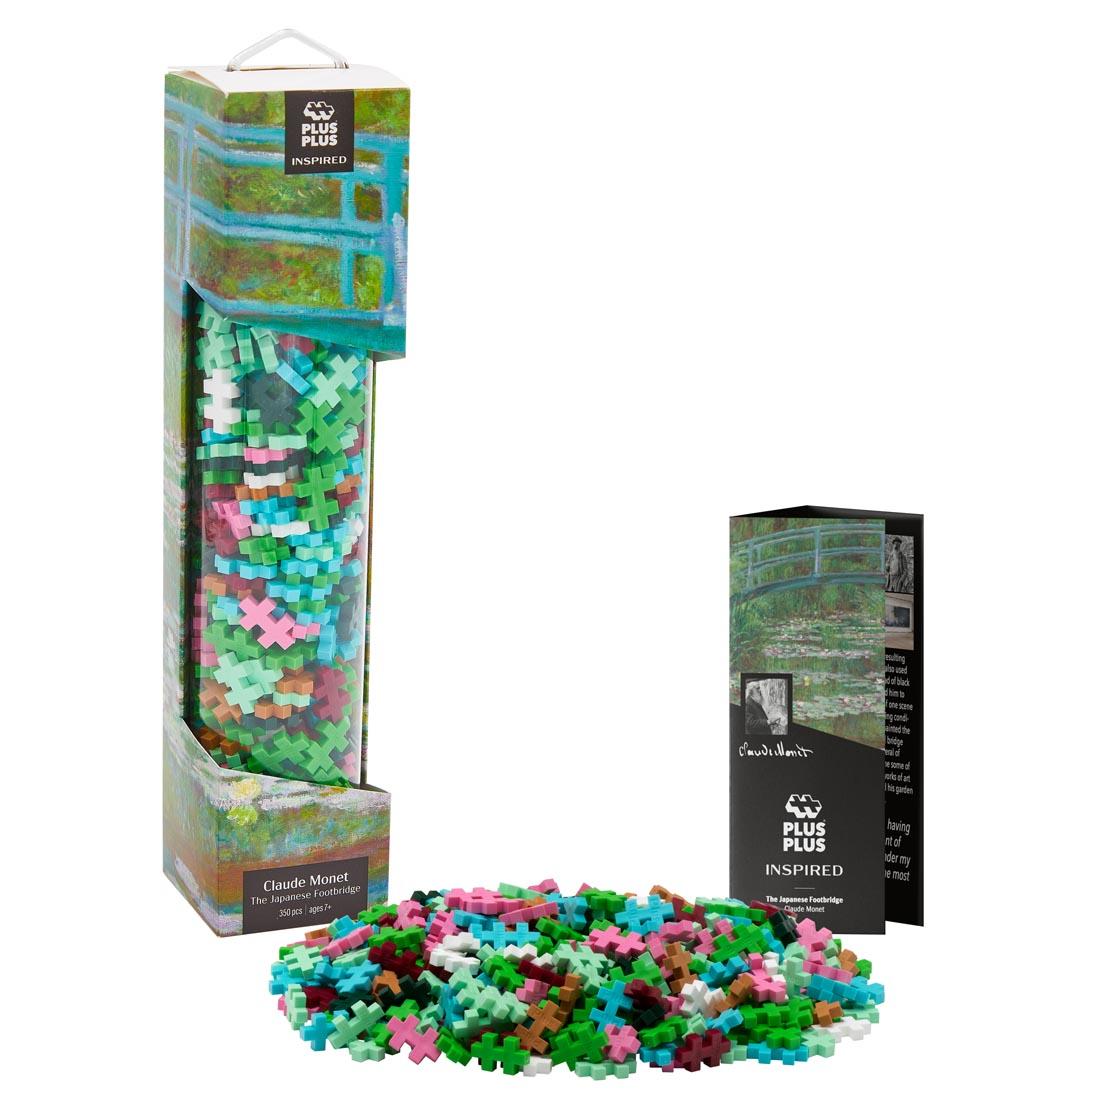 Plus-Plus 350-Piece Monet Inspired Set in package next to a pile of plus-plus pieces and the educational flyer